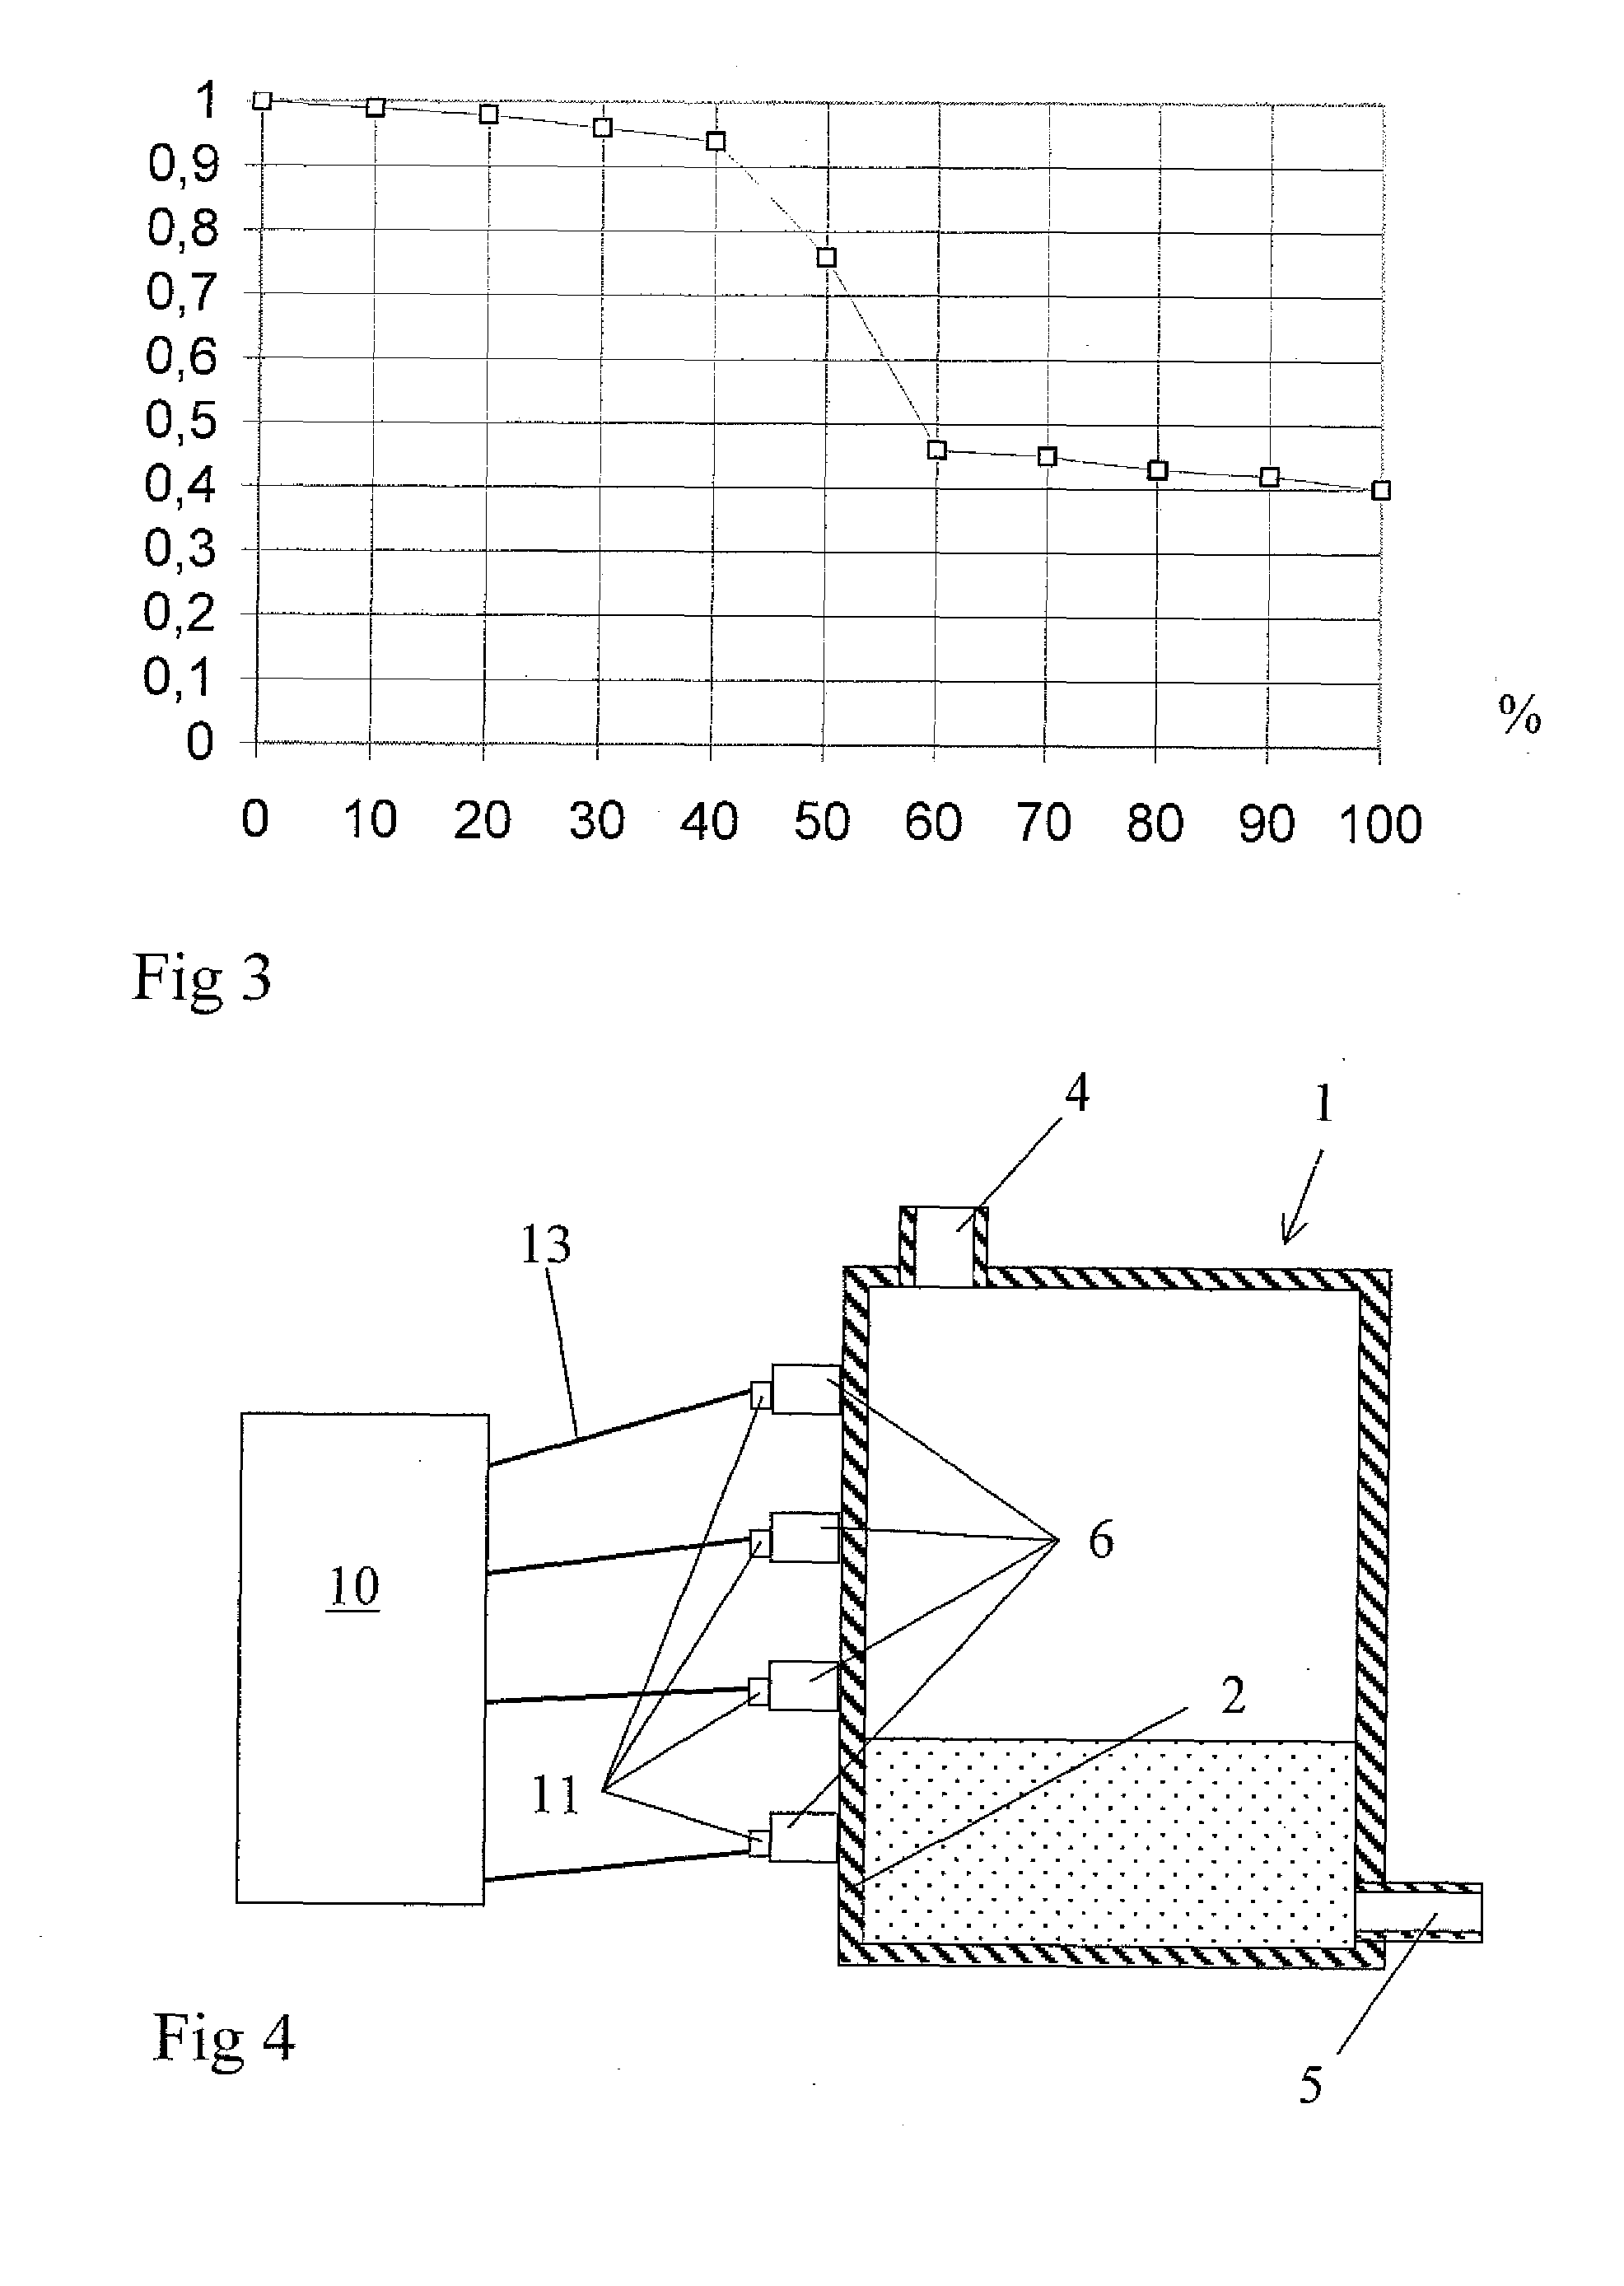 Device and Method for Determination Regarding the Liquid Level in Containers